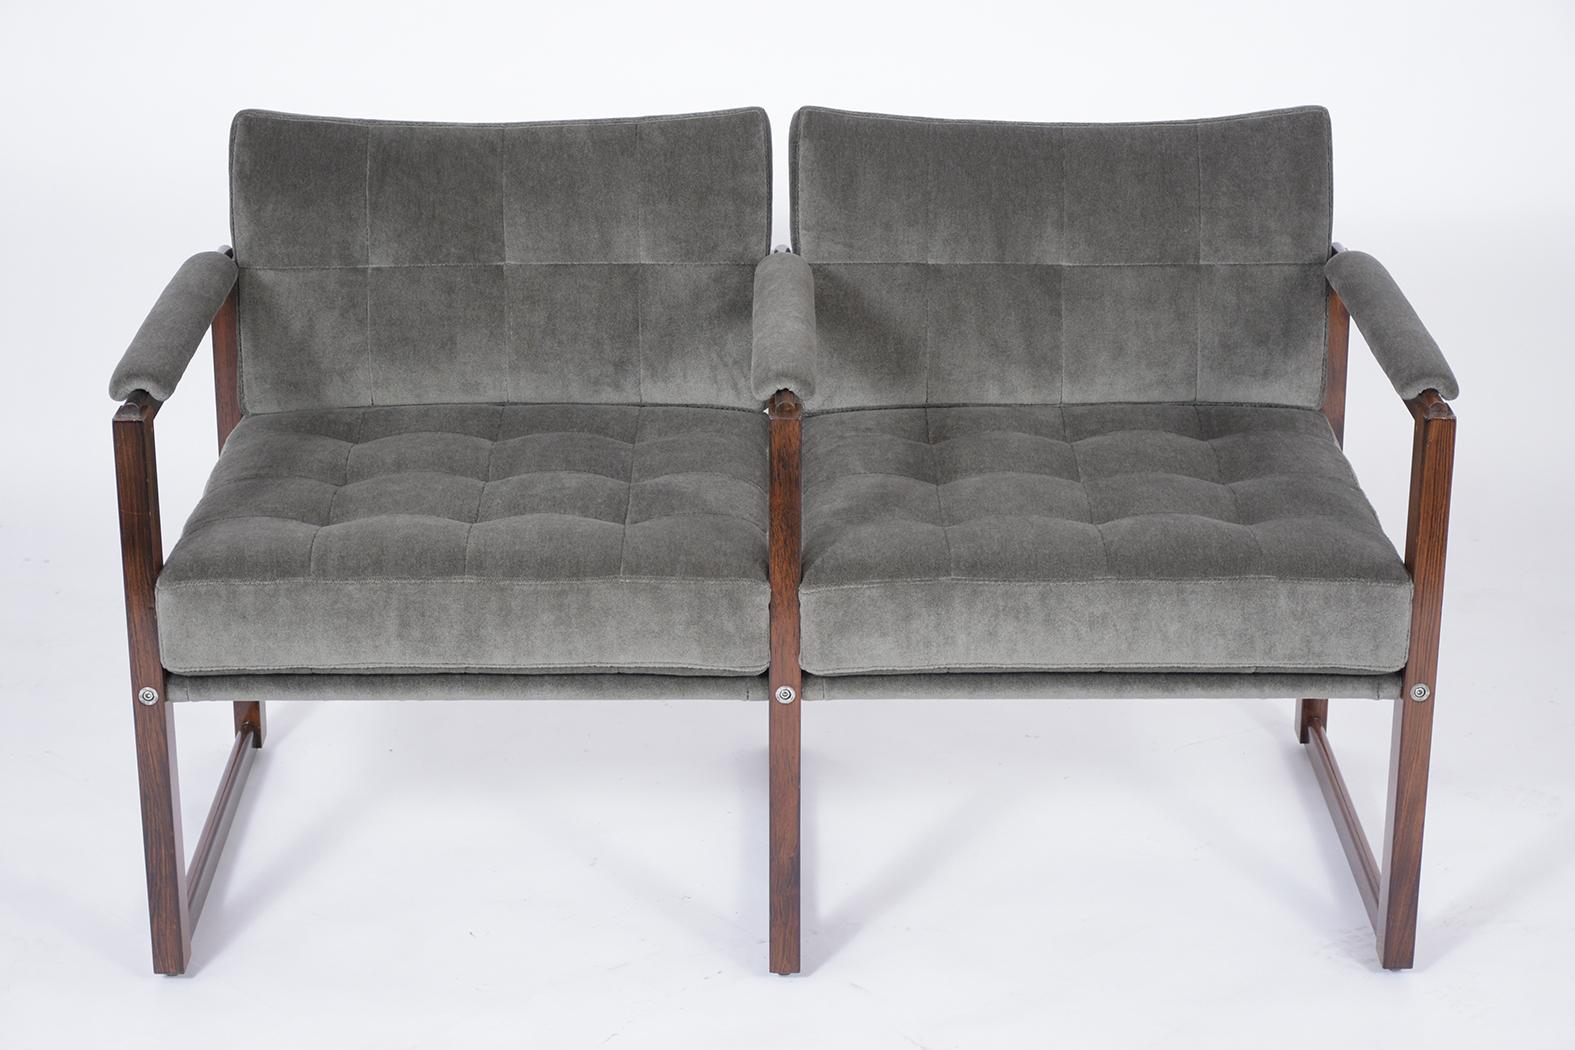 Rediscover midcentury elegance with this exquisitely restored 1960s loveseat, a handcrafted gem made from the finest rosewood. Our skilled craftsmen have revitalized this two-seater bench to its former glory, ensuring it will complement your